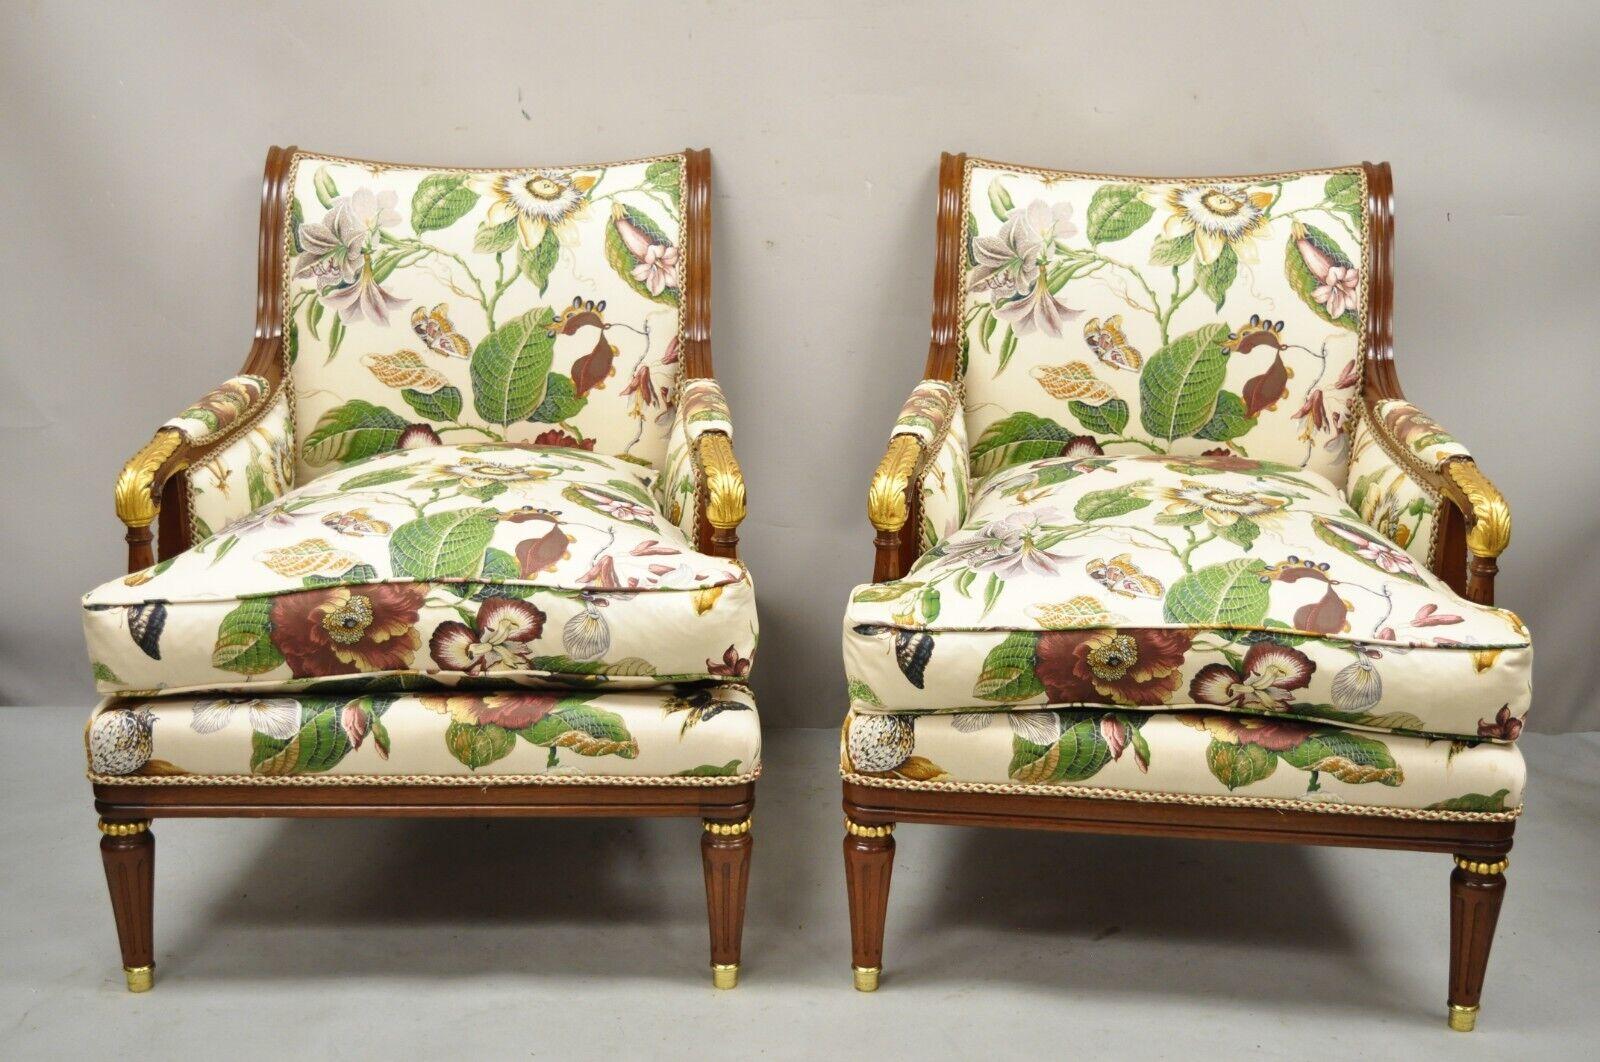 French Regency Style Floral Print Mahogany Frame Club Lounge Chairs - a Pair. Item features partial down filled cushions, brass capped feet, gold glit accents, floral print upholstery with butterflies, solid wood frames, nicely carved details,